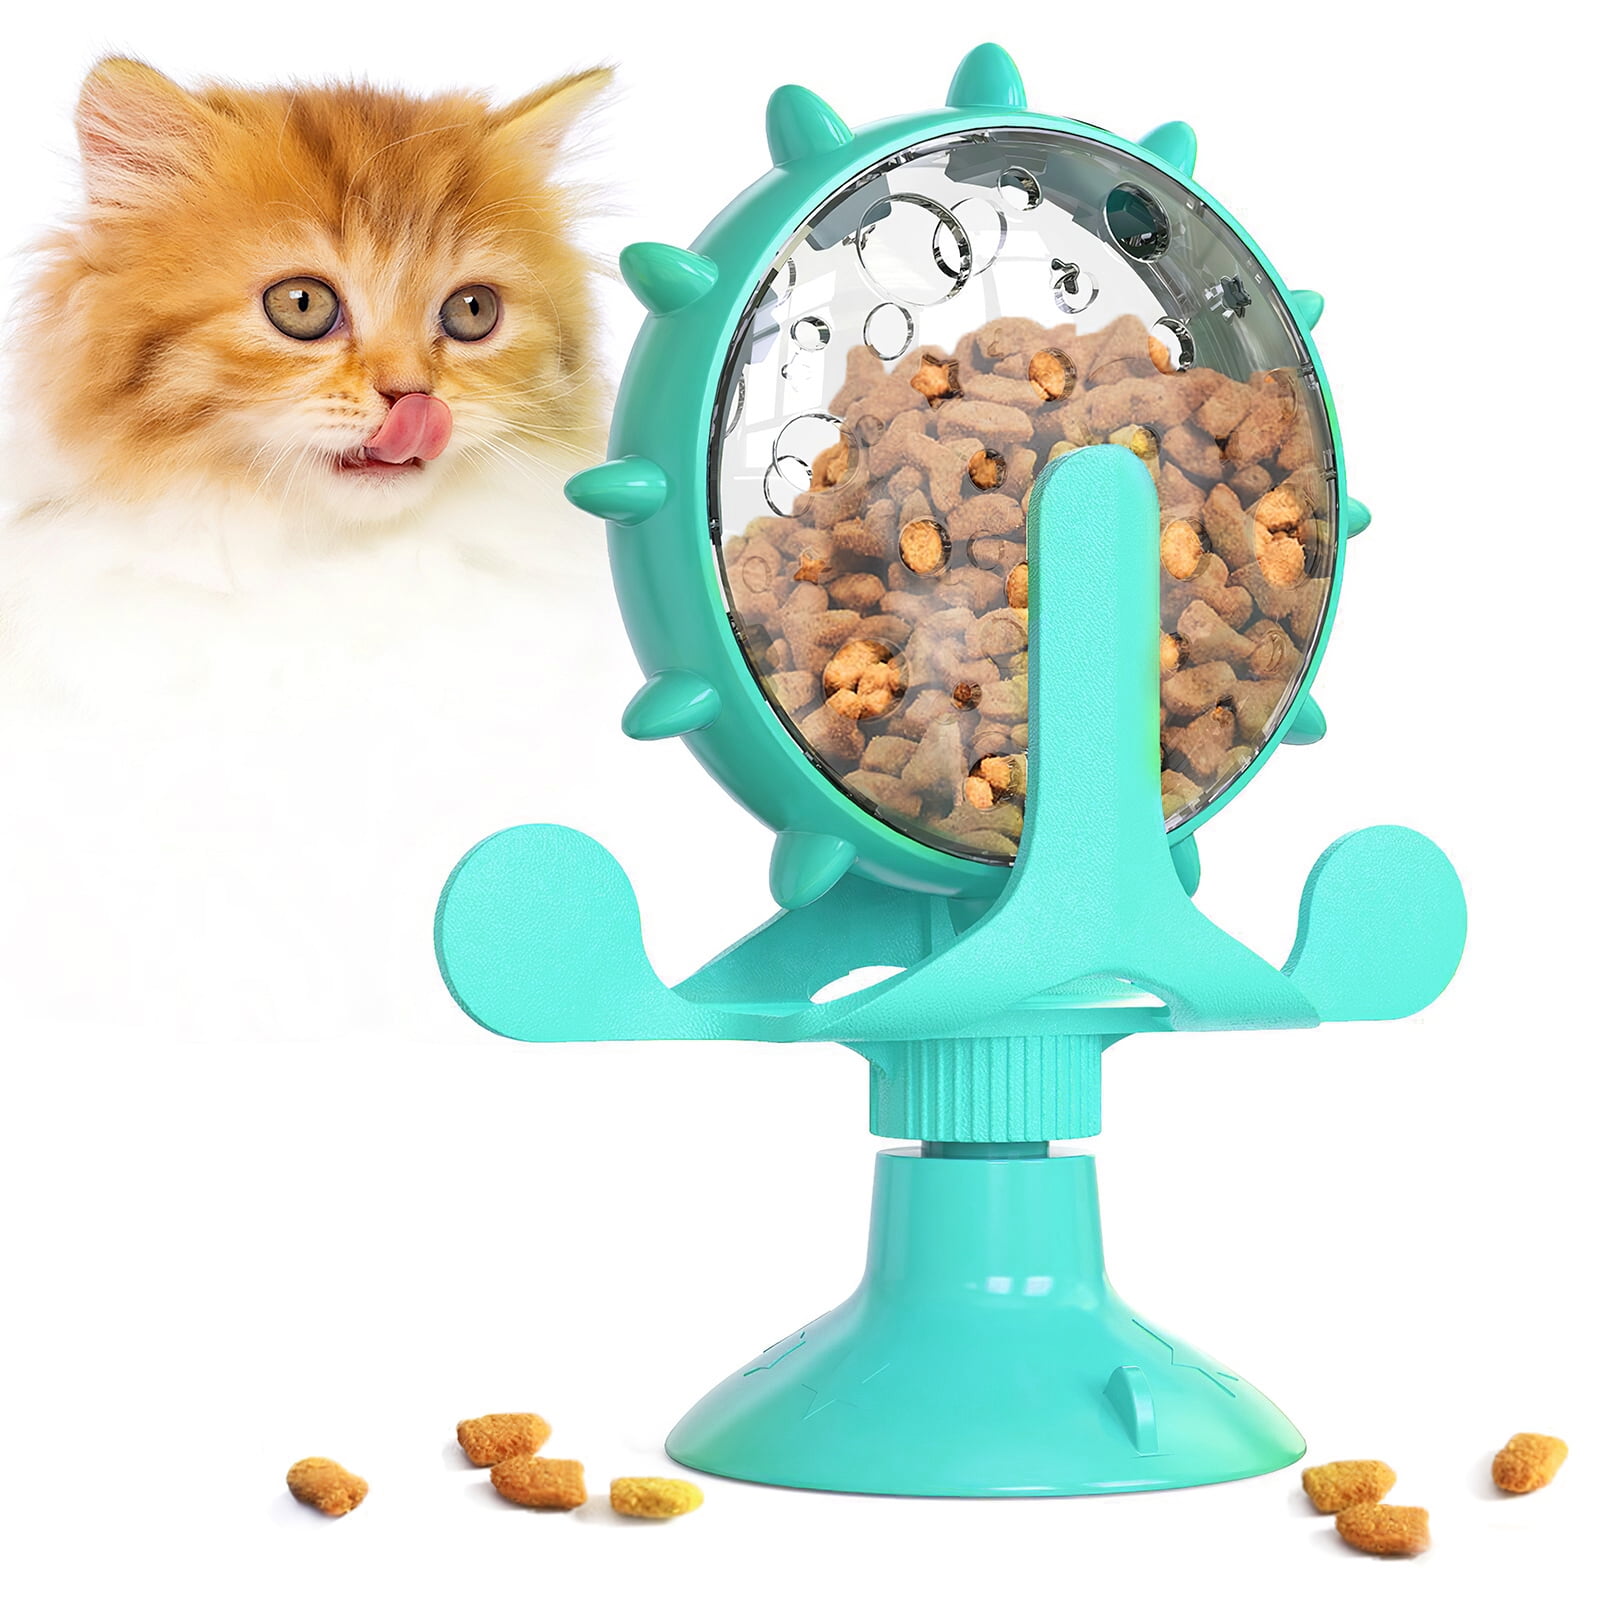 TINKER Cat Toy Feeding Toys Spinning Windmill Relieving Boredom Pet Kitty  Self-healing Interactive Toys 